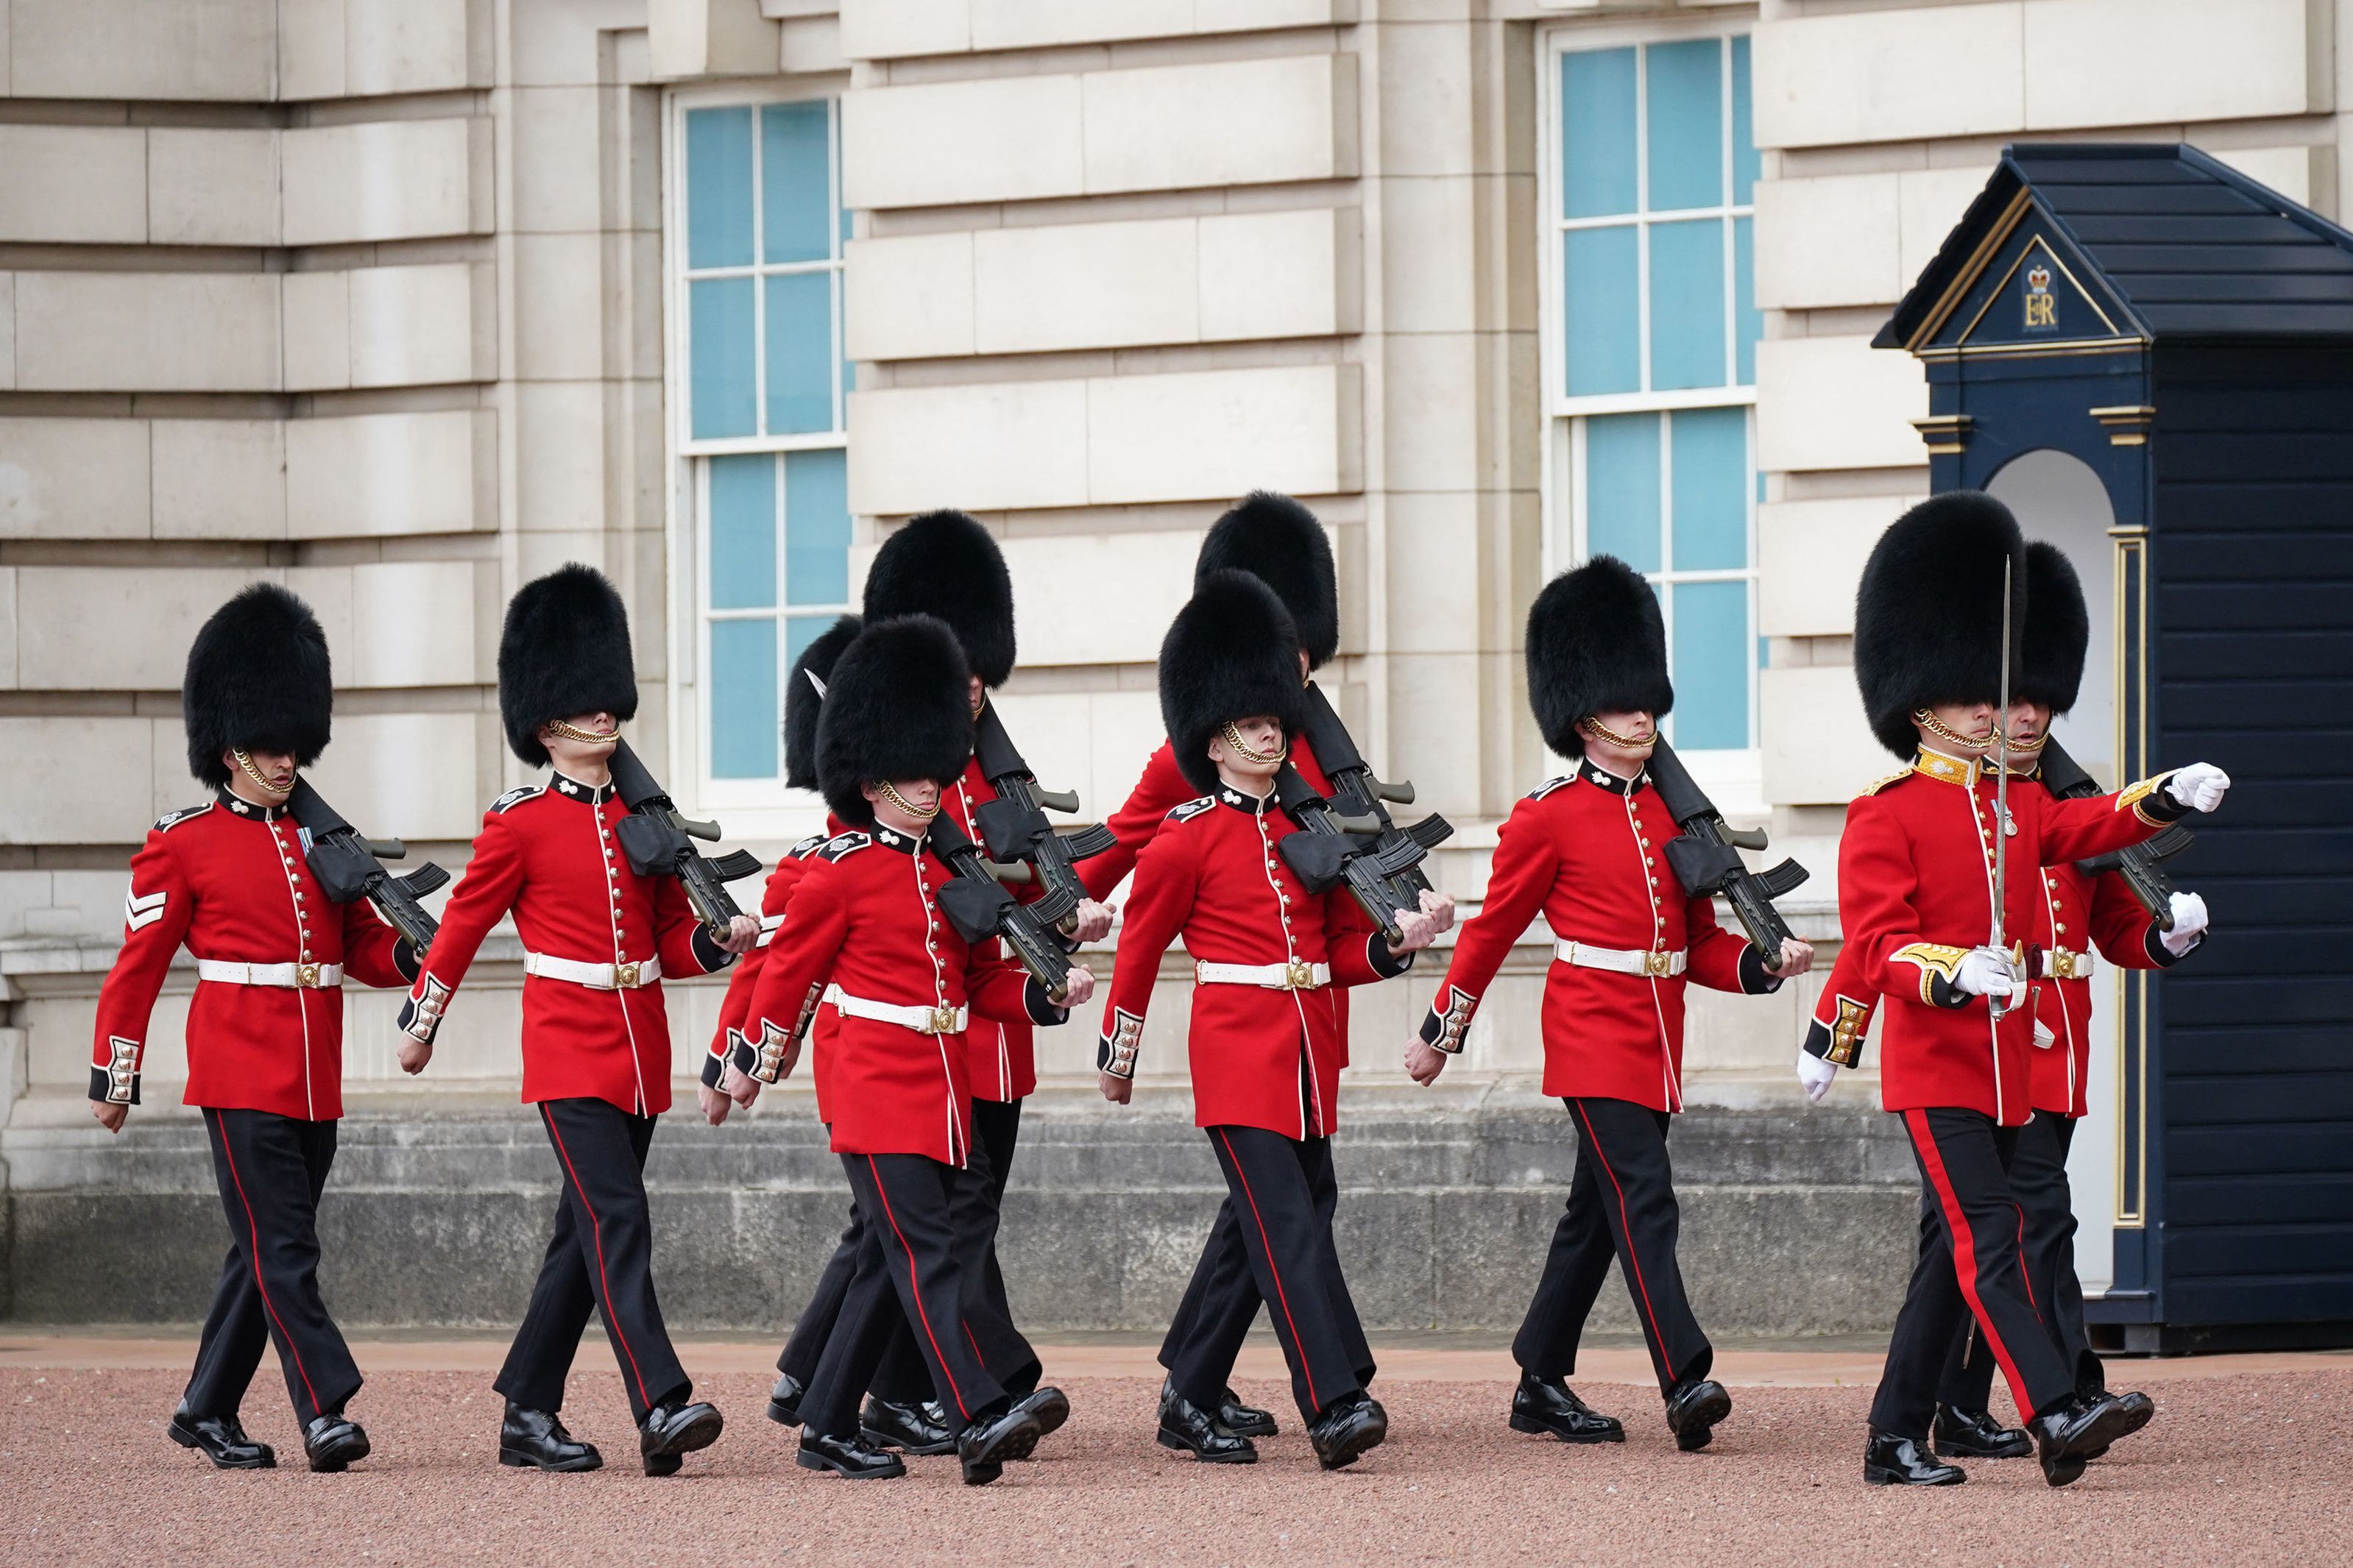 19-facts-about-queens-guard-changing-ceremony